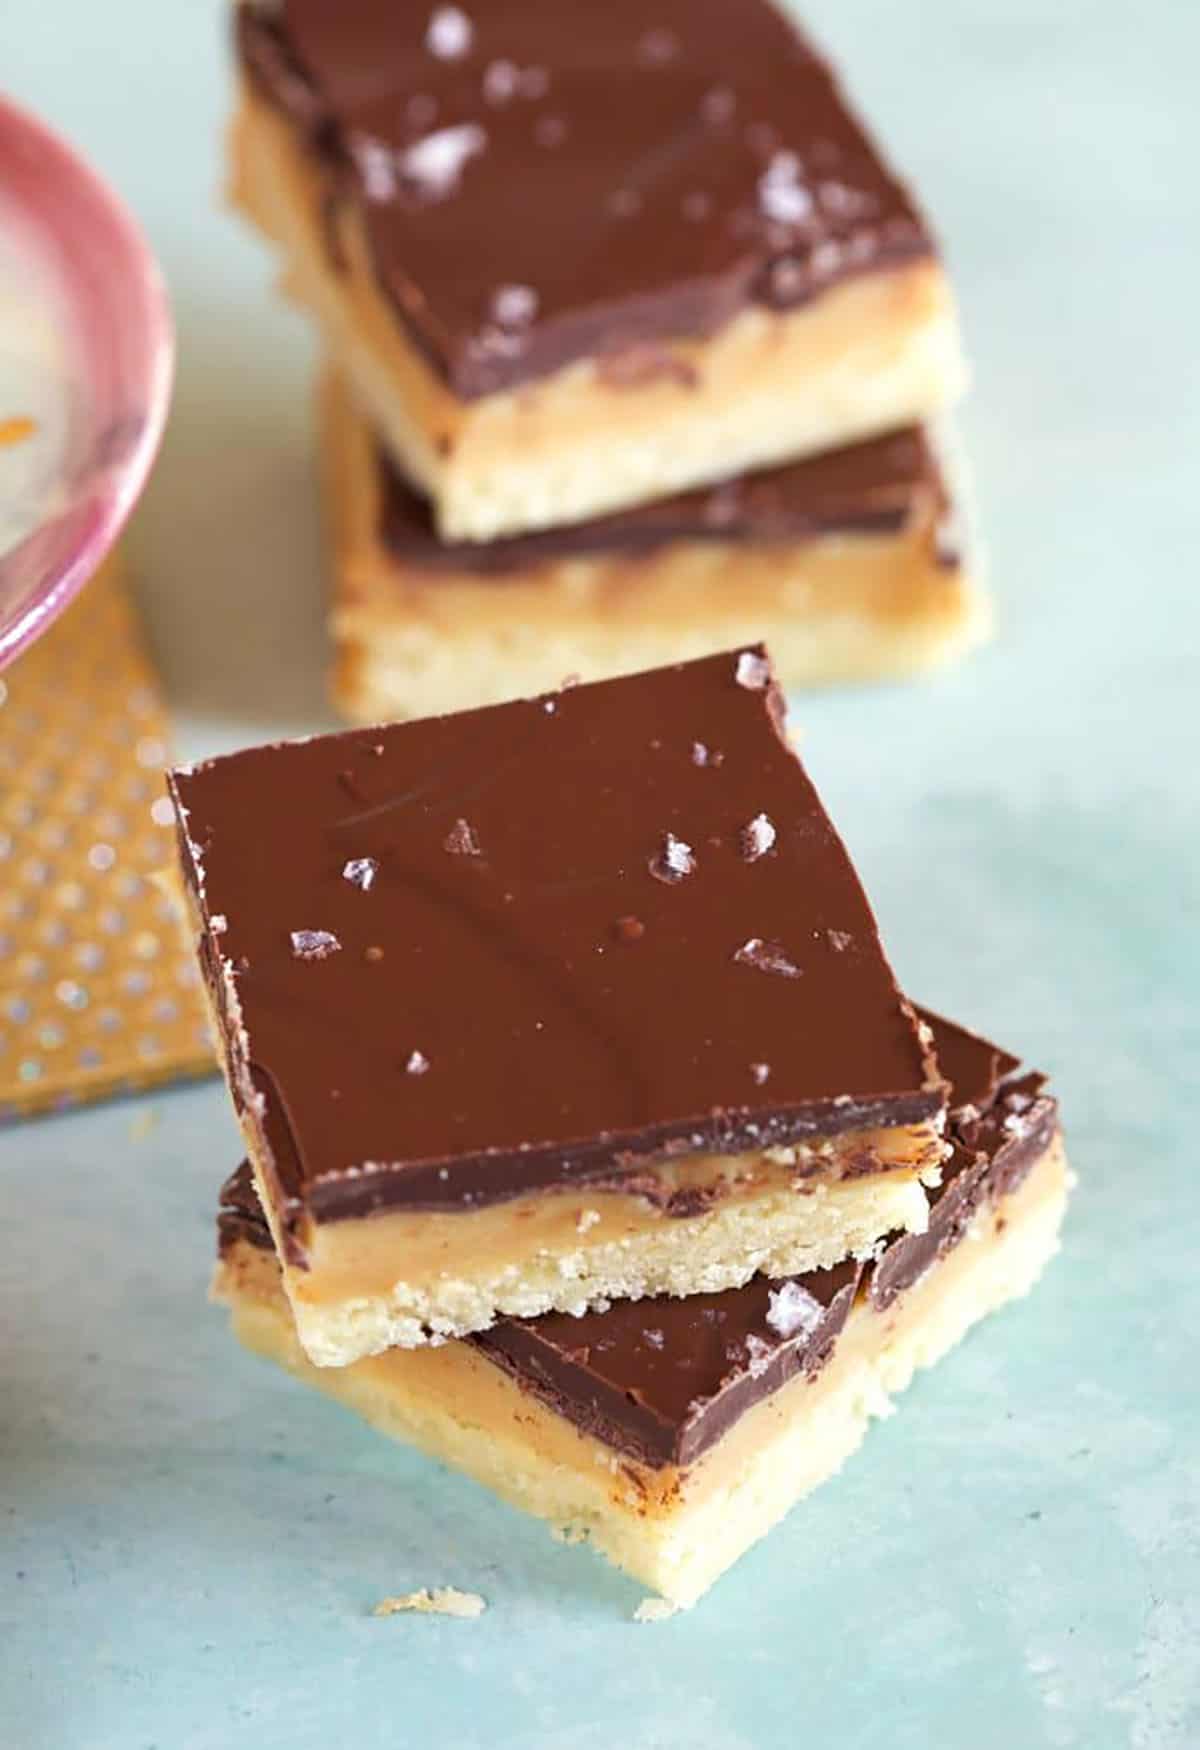 Millionaire Shortbread Bars stacked on a blue background.